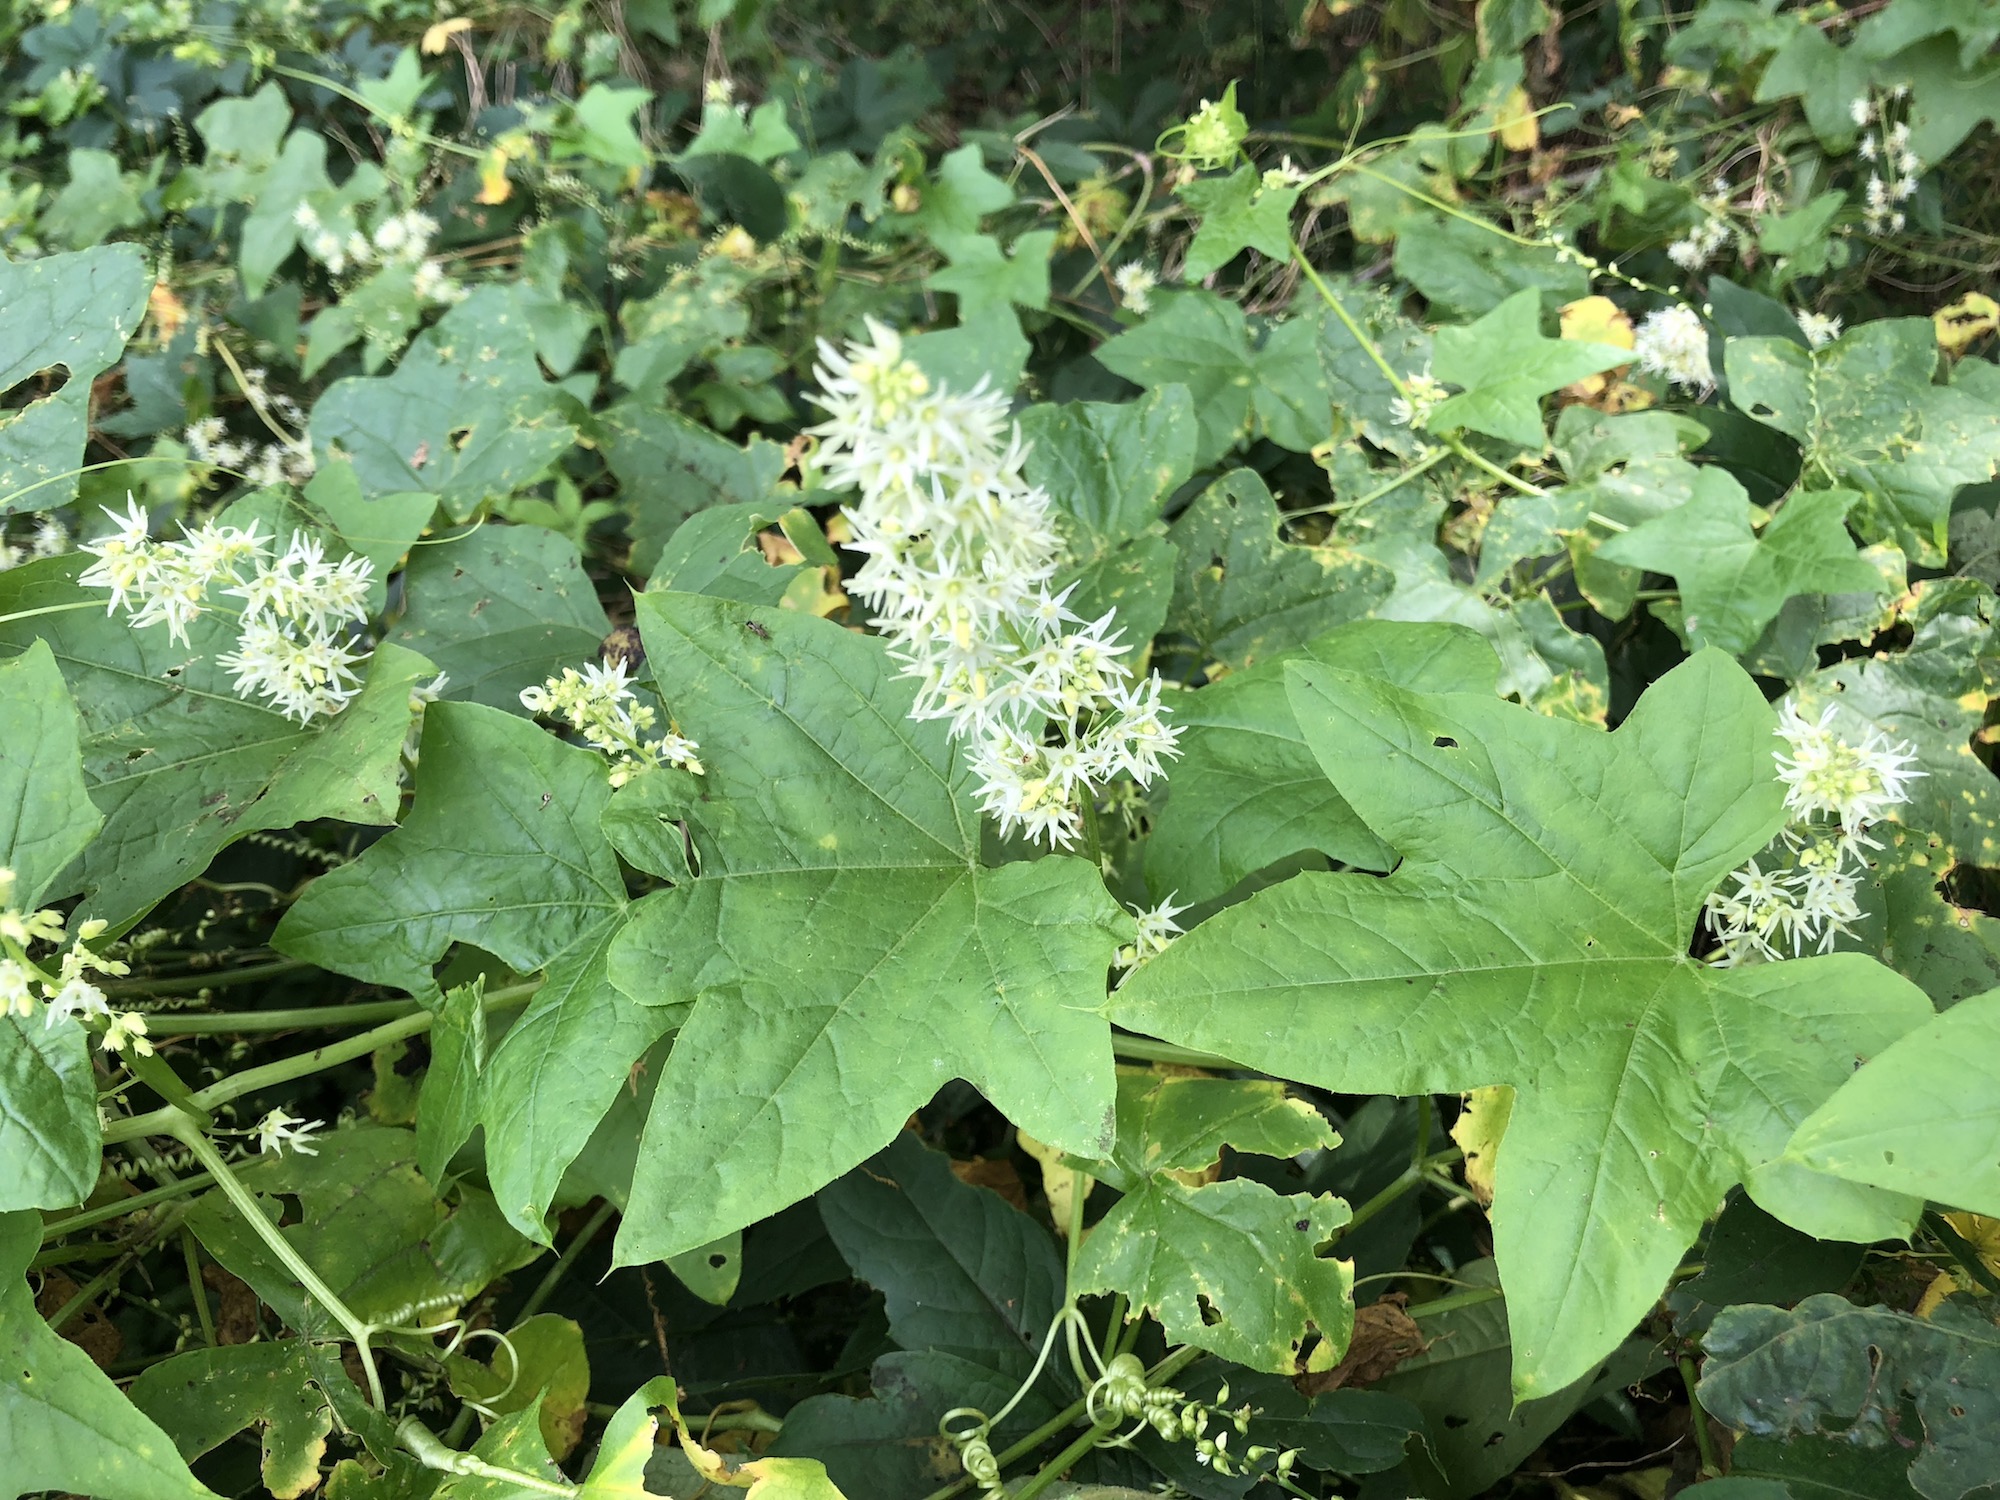 Wild Cucumber at edge of woods on Arbor Drive in Madison, Wisconsin on August 28, 2018.